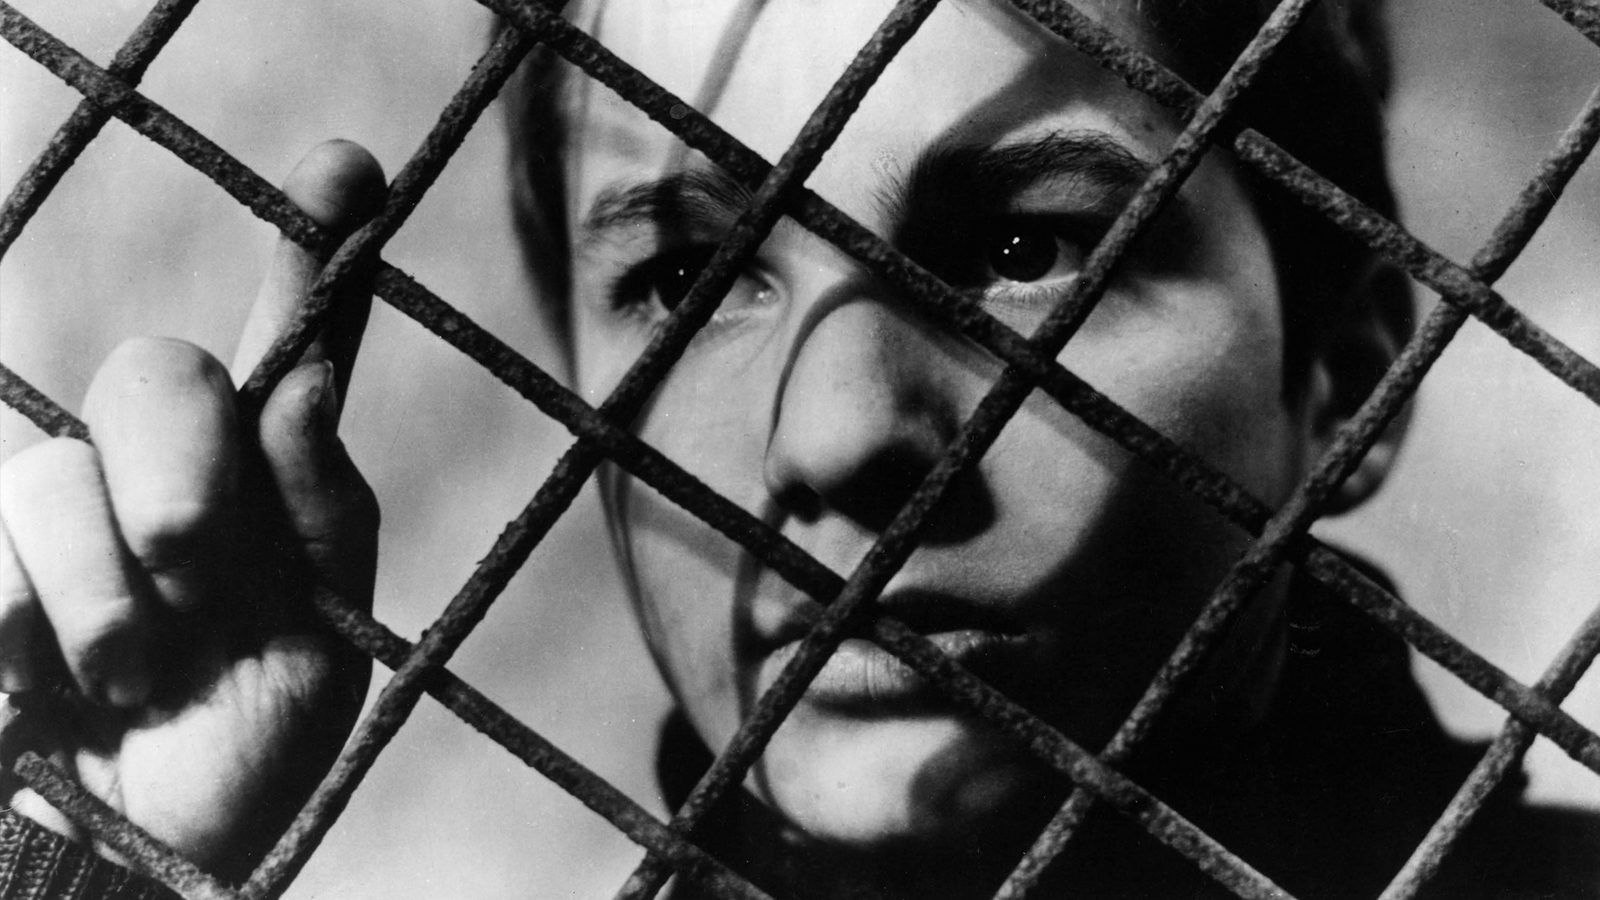 The 400 Blows Film at Lincoln Center